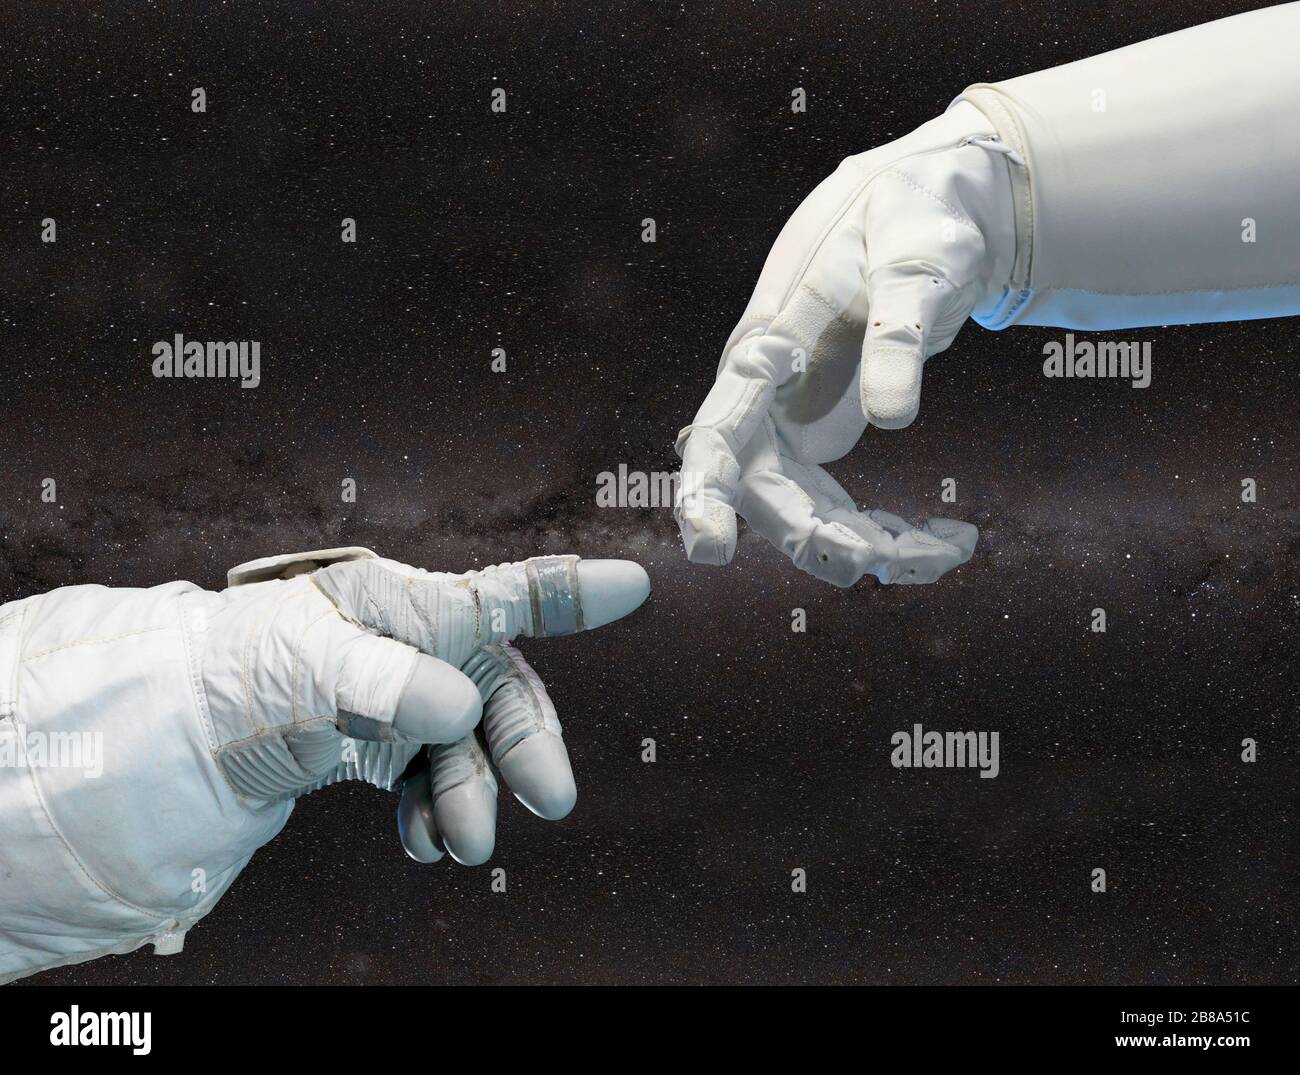 Astronaut and robotic hand in contact. Elements of this image furnished by NASA. Stock Photo